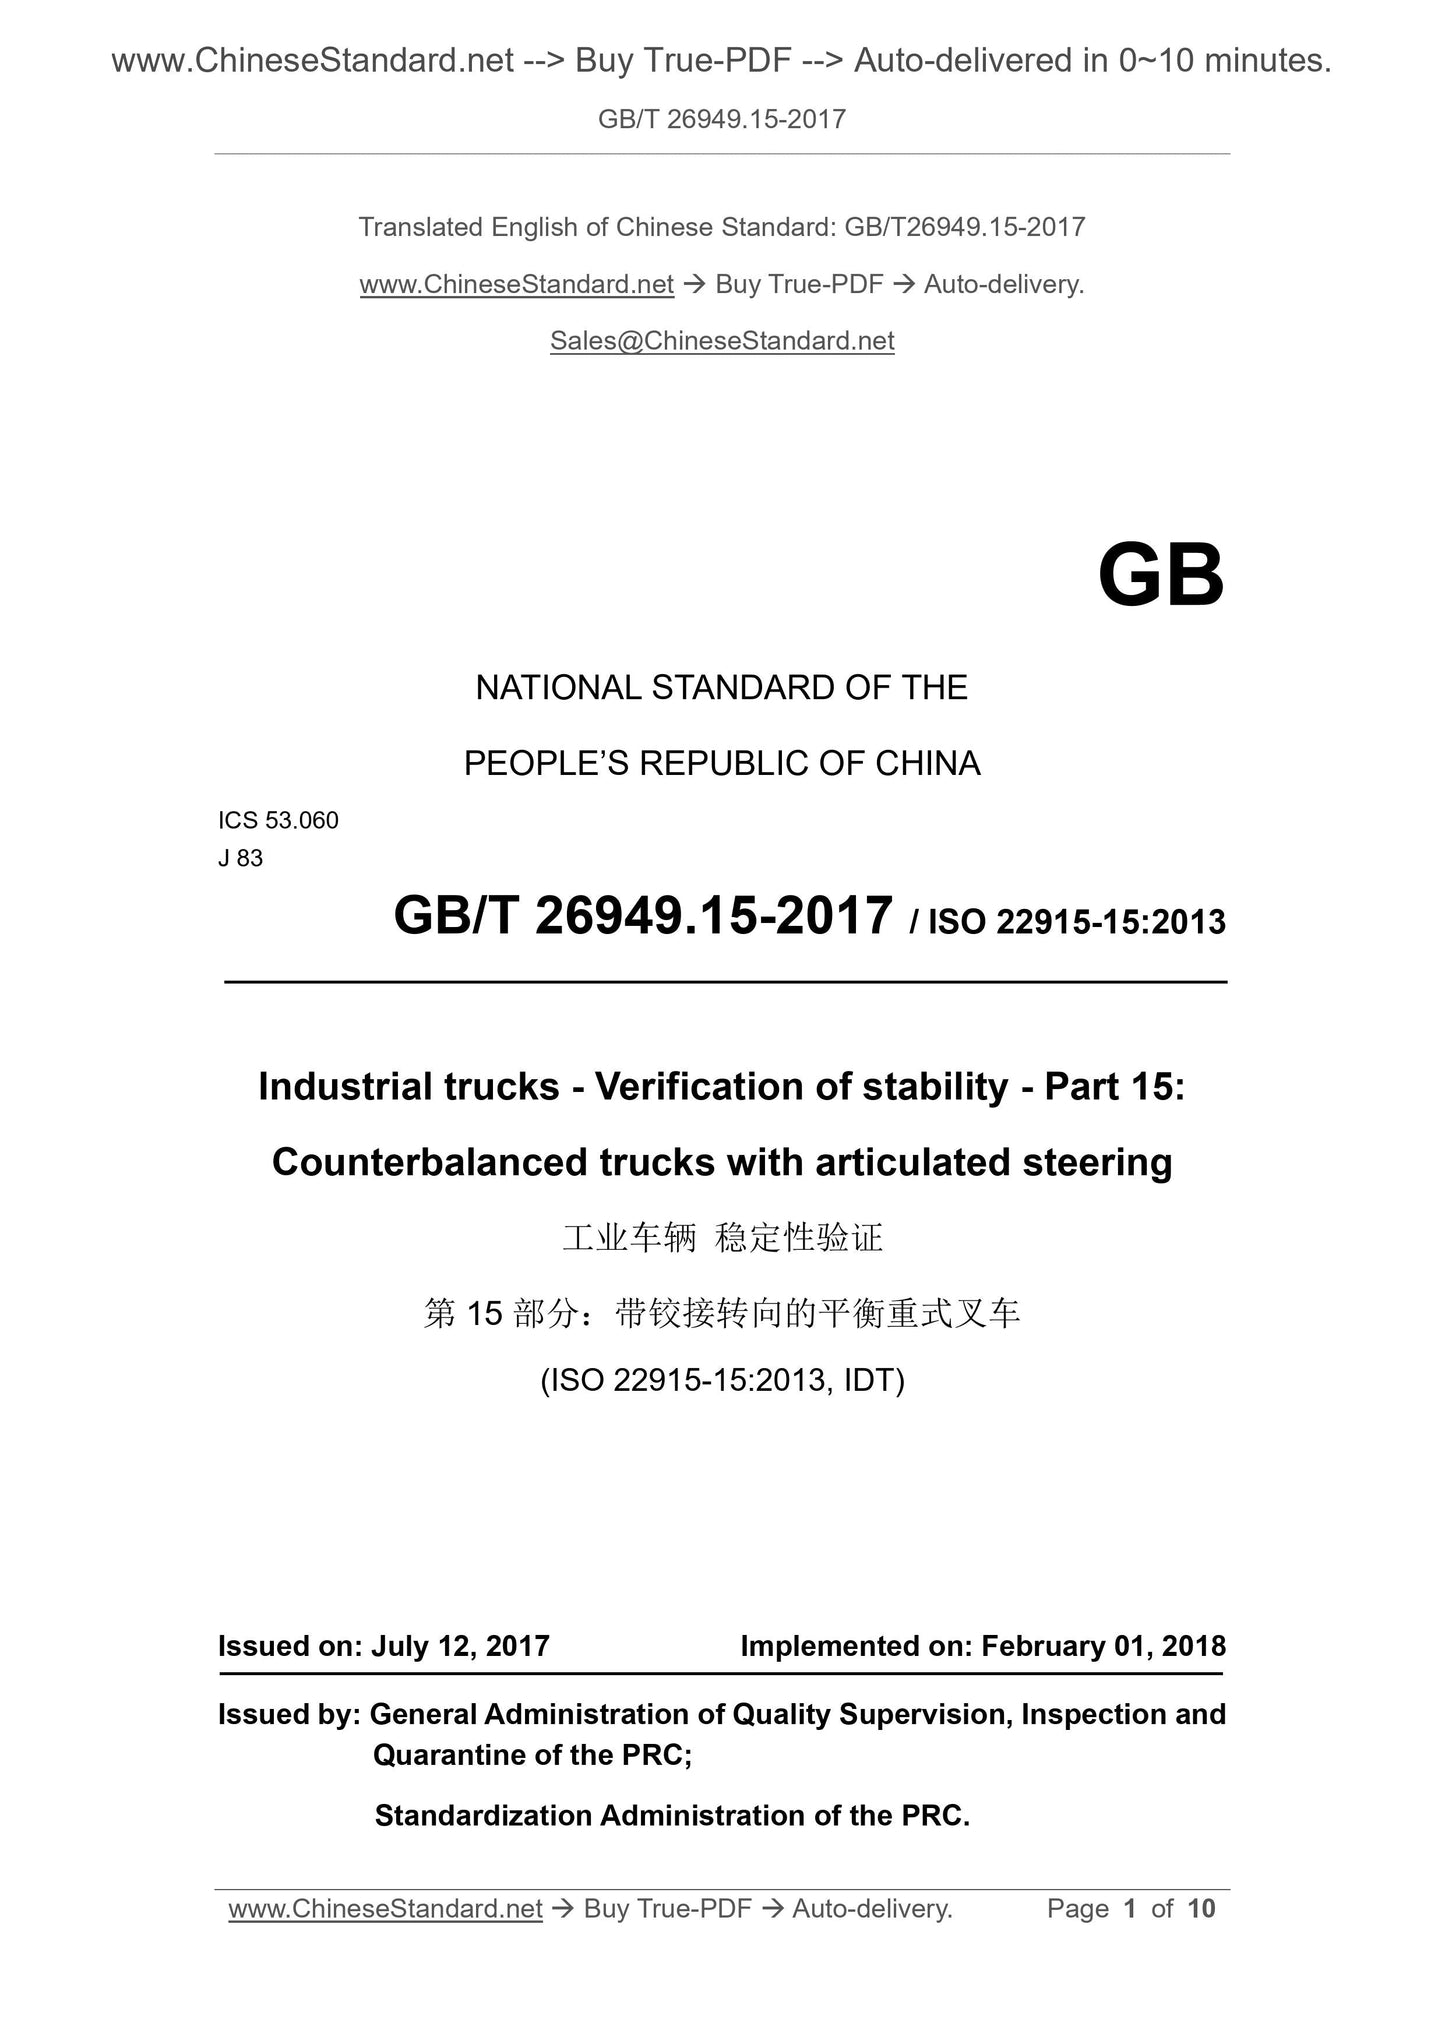 GB/T 26949.15-2017 Page 1